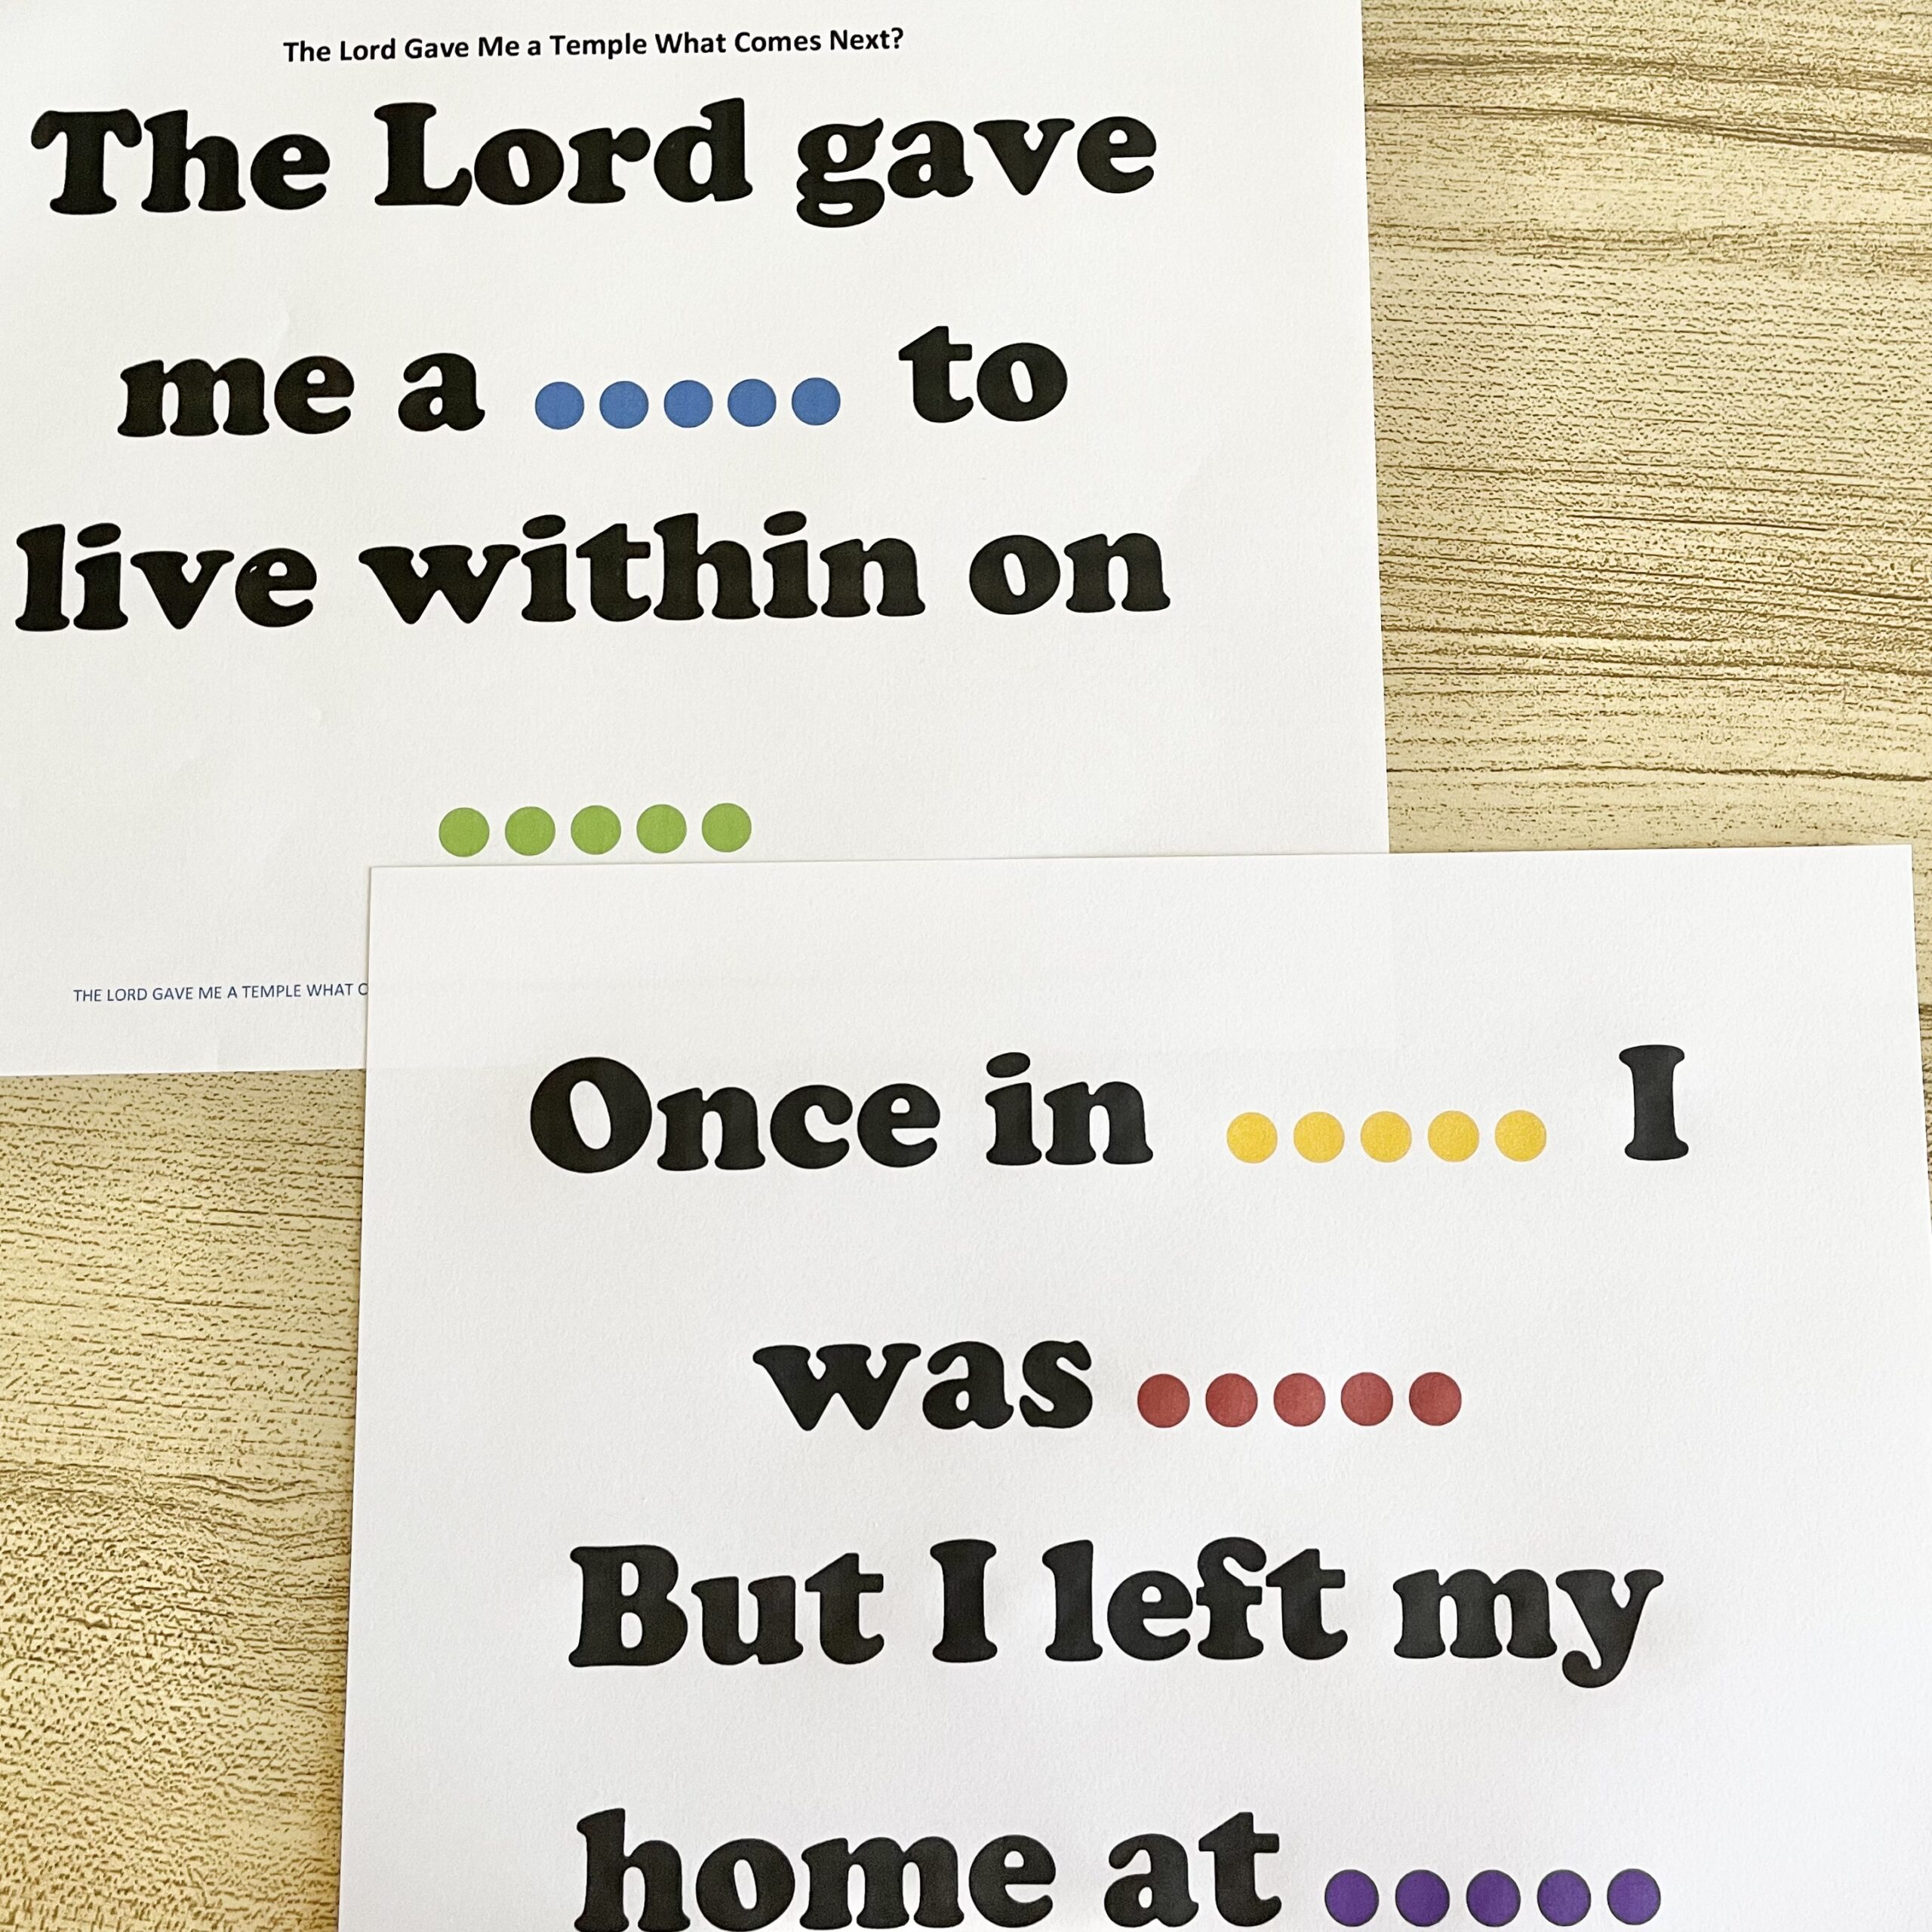 The Lord Gave Me a Temple What Comes Next? Use this fun word game with dot words to determine which keyword comes next. Includes extension ideas and printable for LDS Primary Music Leaders.